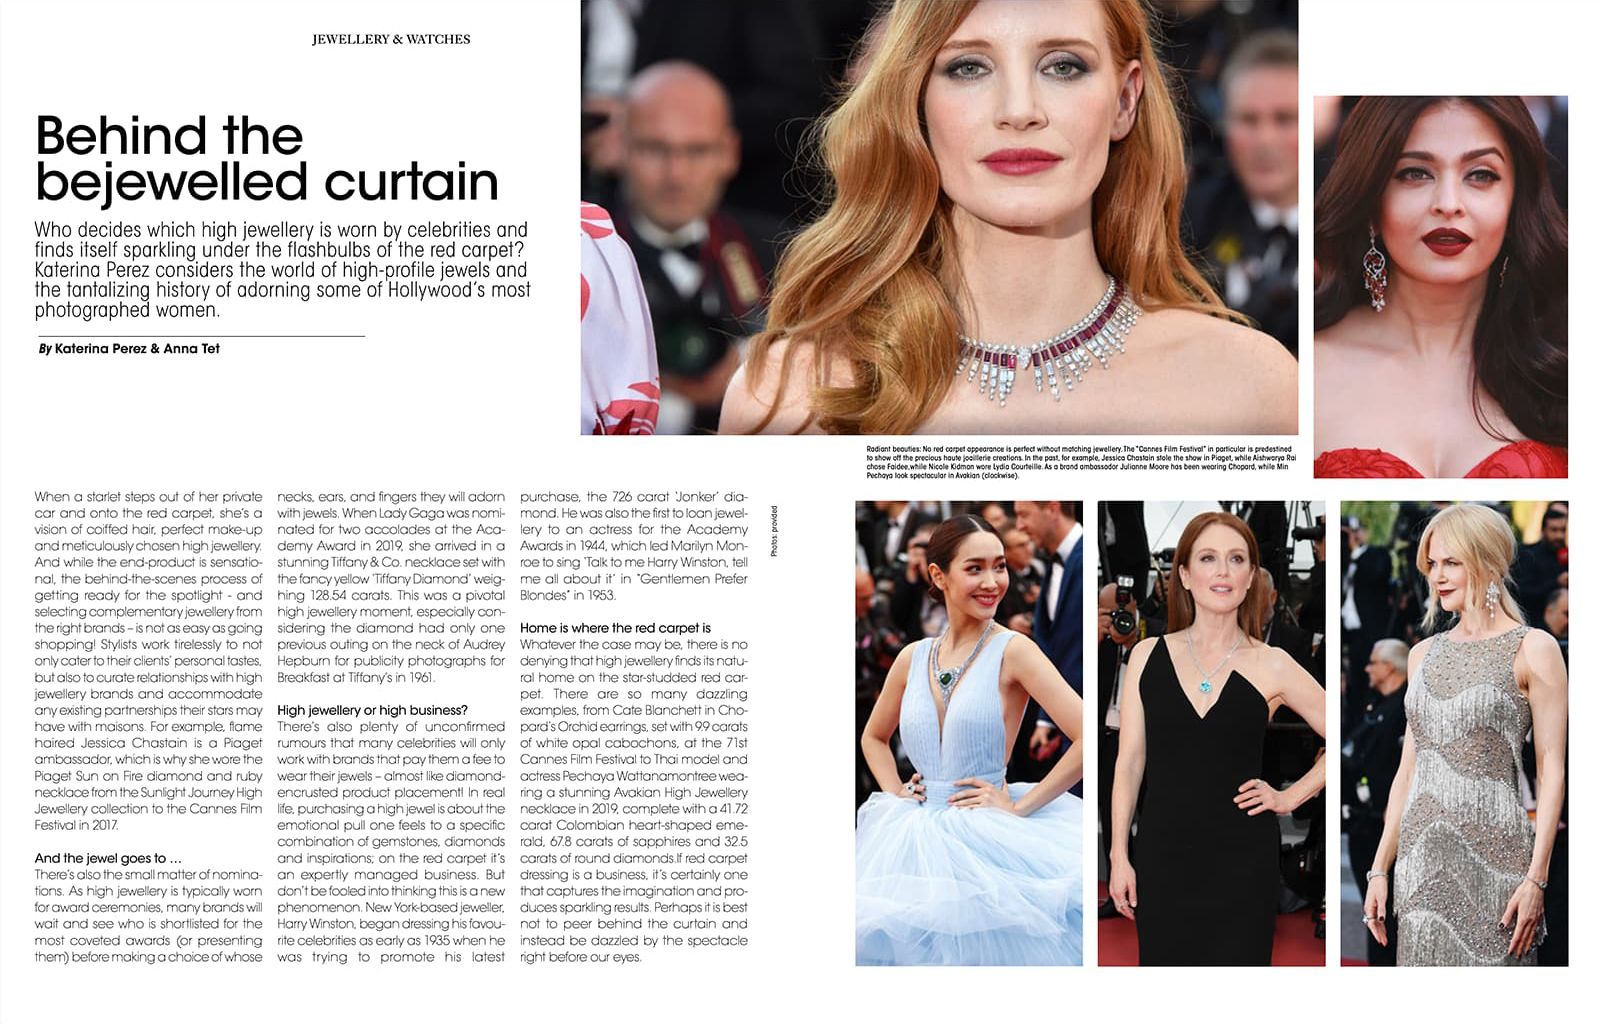 An article written by Katerina Perez for L'Officiel magazine about the business of dressing stars for the red carpet